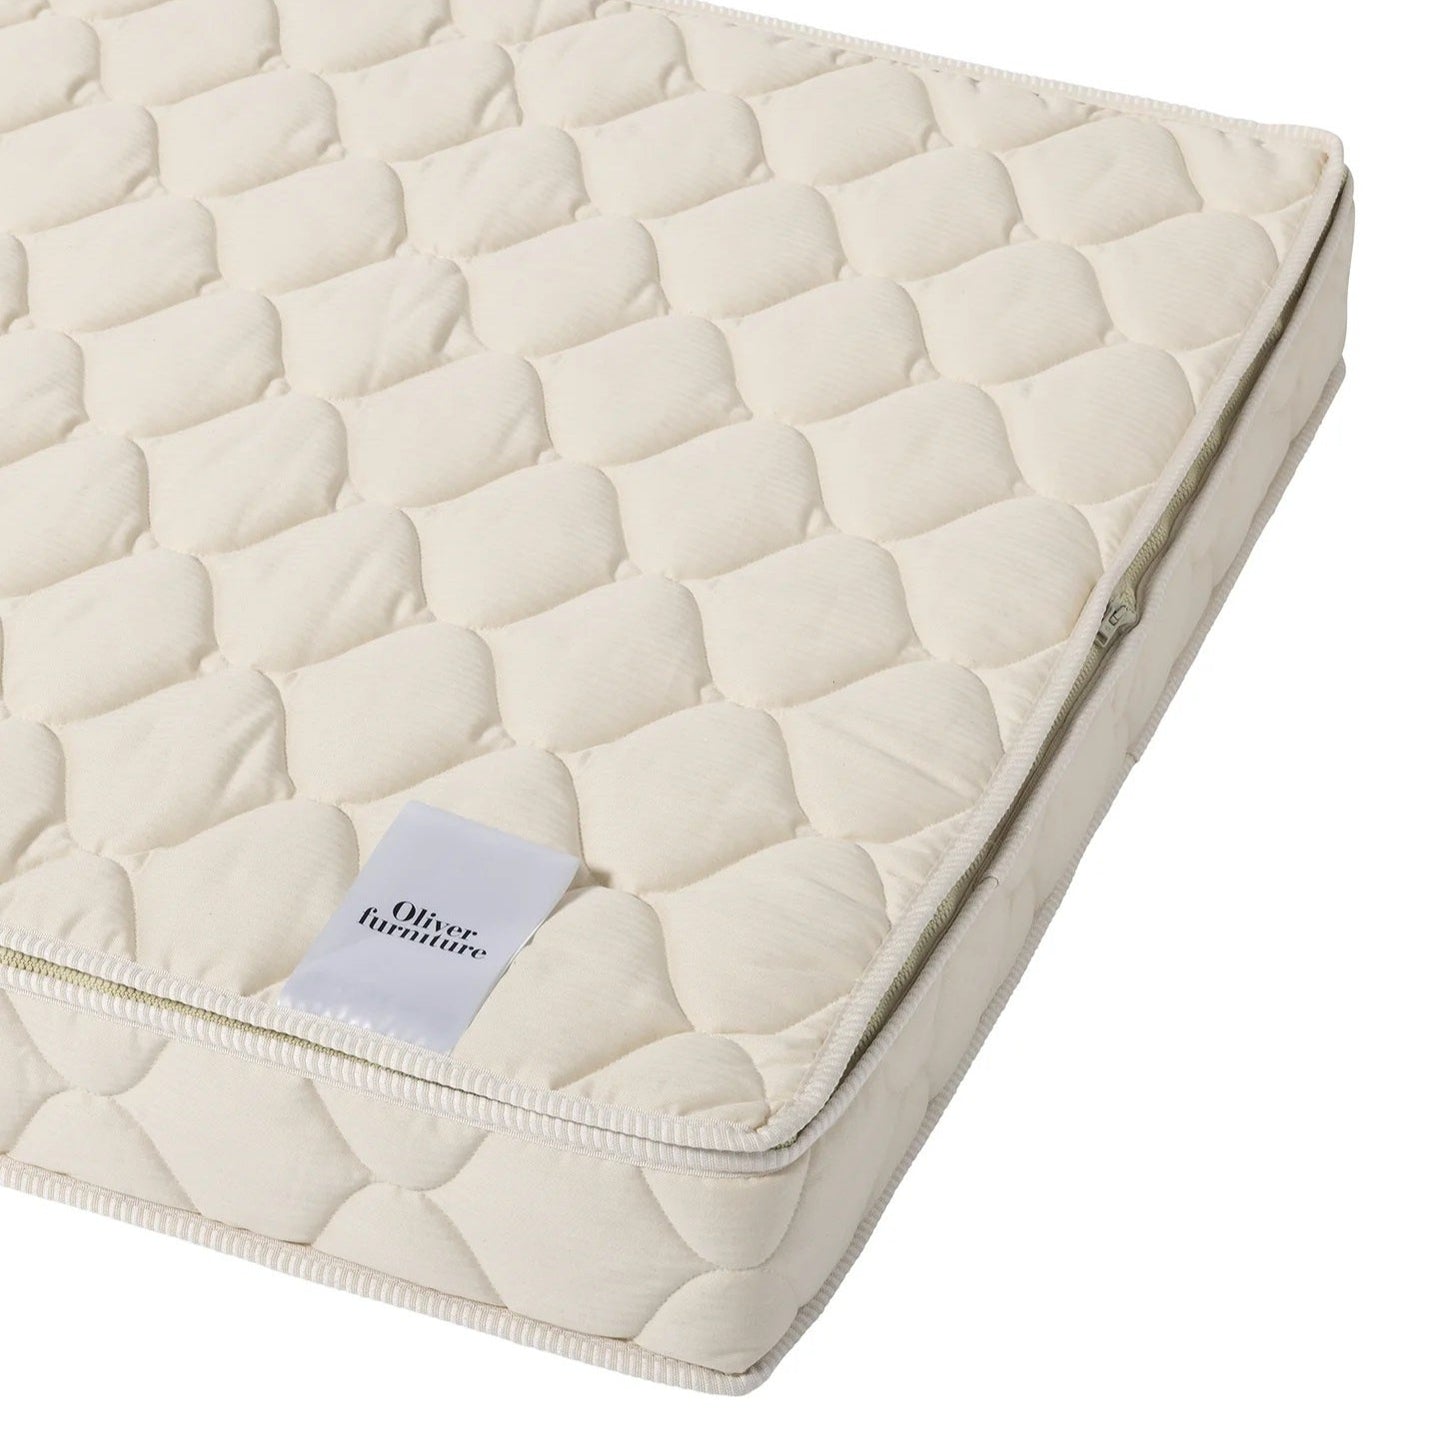 Oliver Furniture Mattress for Seaside Classic Beds - 90 x 200cm